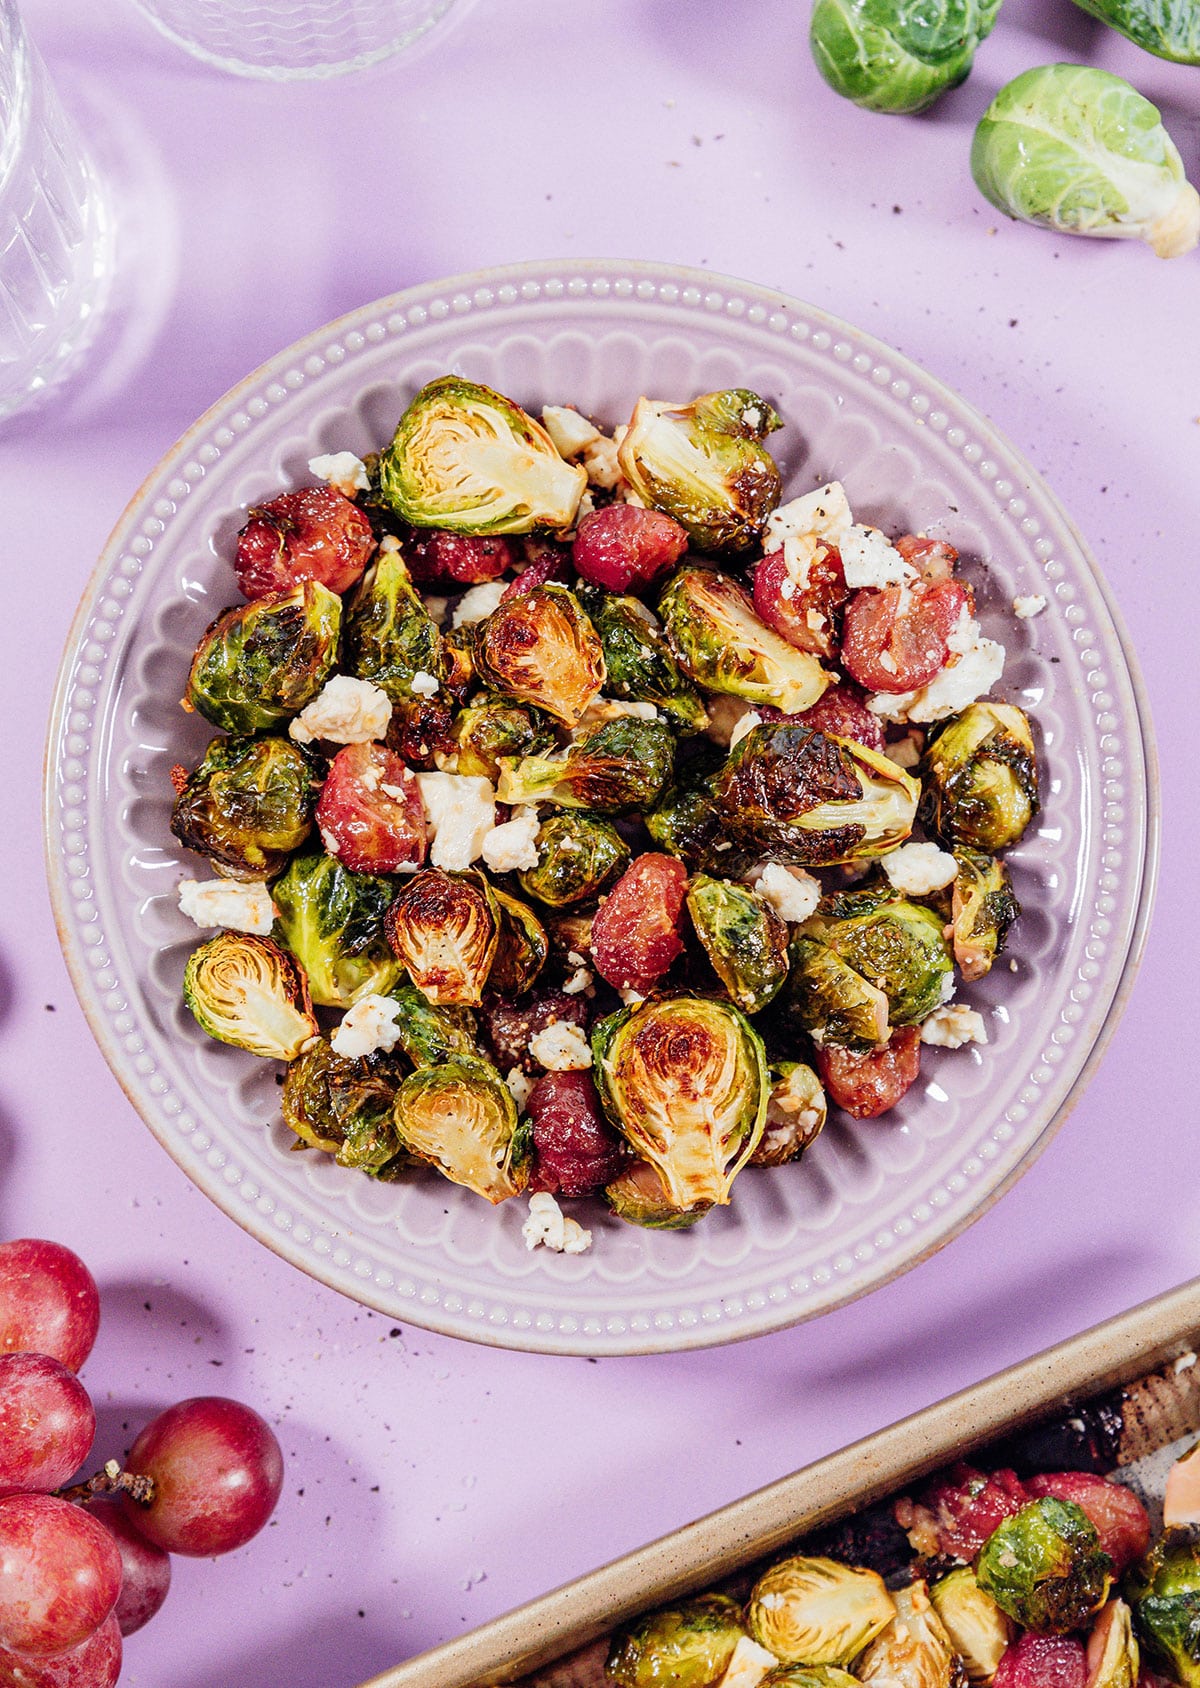 These roasted Brussels sprouts with balsamic and garlic are tossed together with grapes and feta cheese and become such a flavorful side dish! 